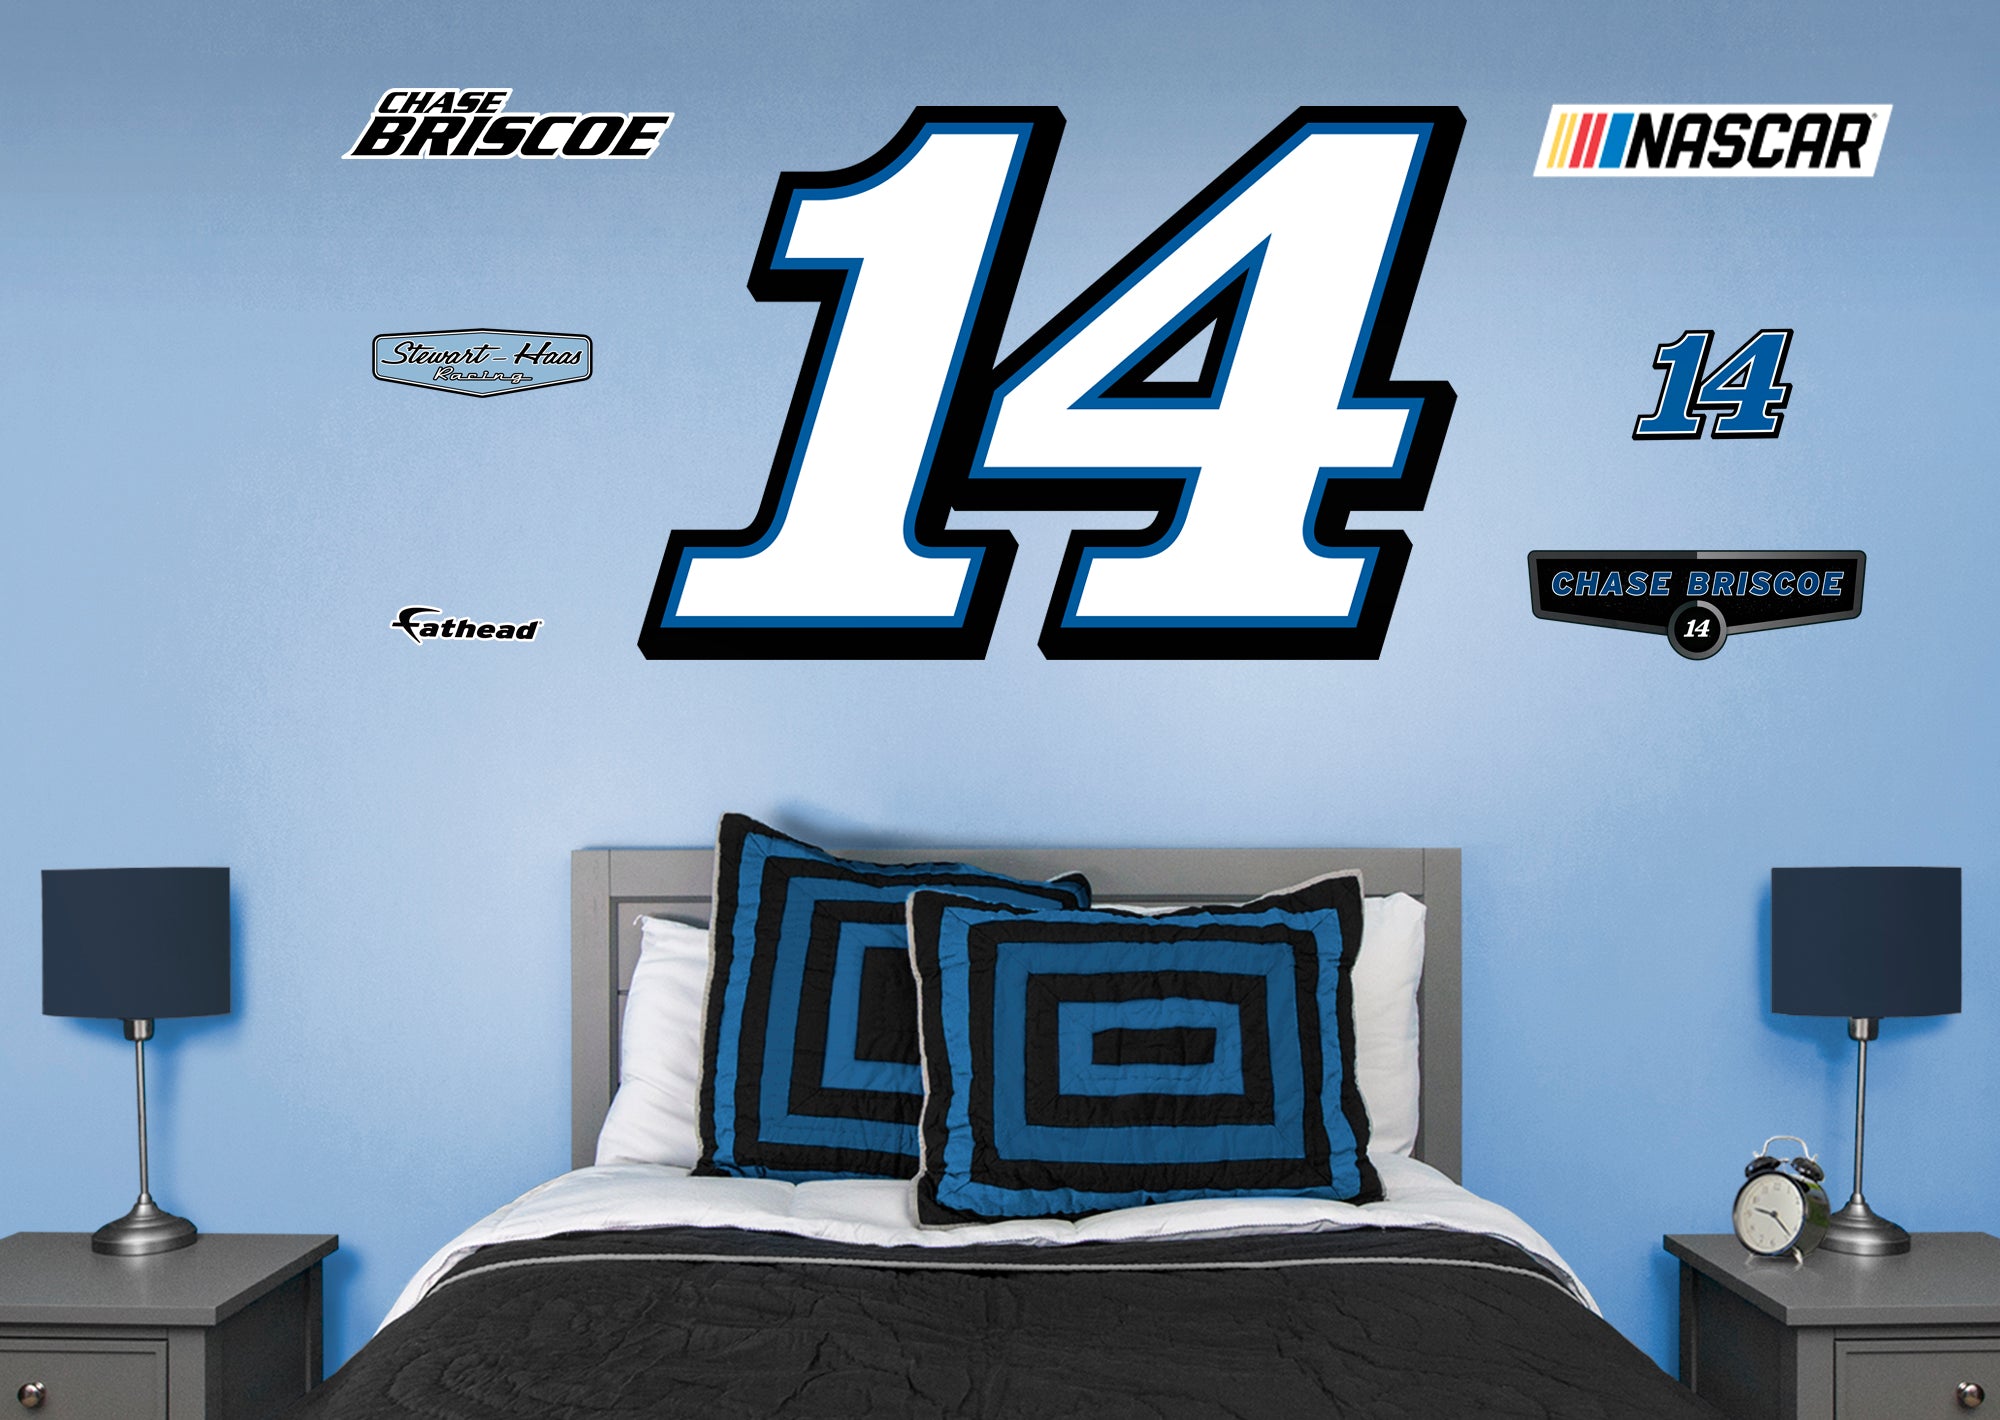 Chase Briscoe 2021 #14 Logo - Officially Licensed NASCAR Removable Wall Decal Giant Logo + 6 Decals (34"W x 51"H) by Fathead | V